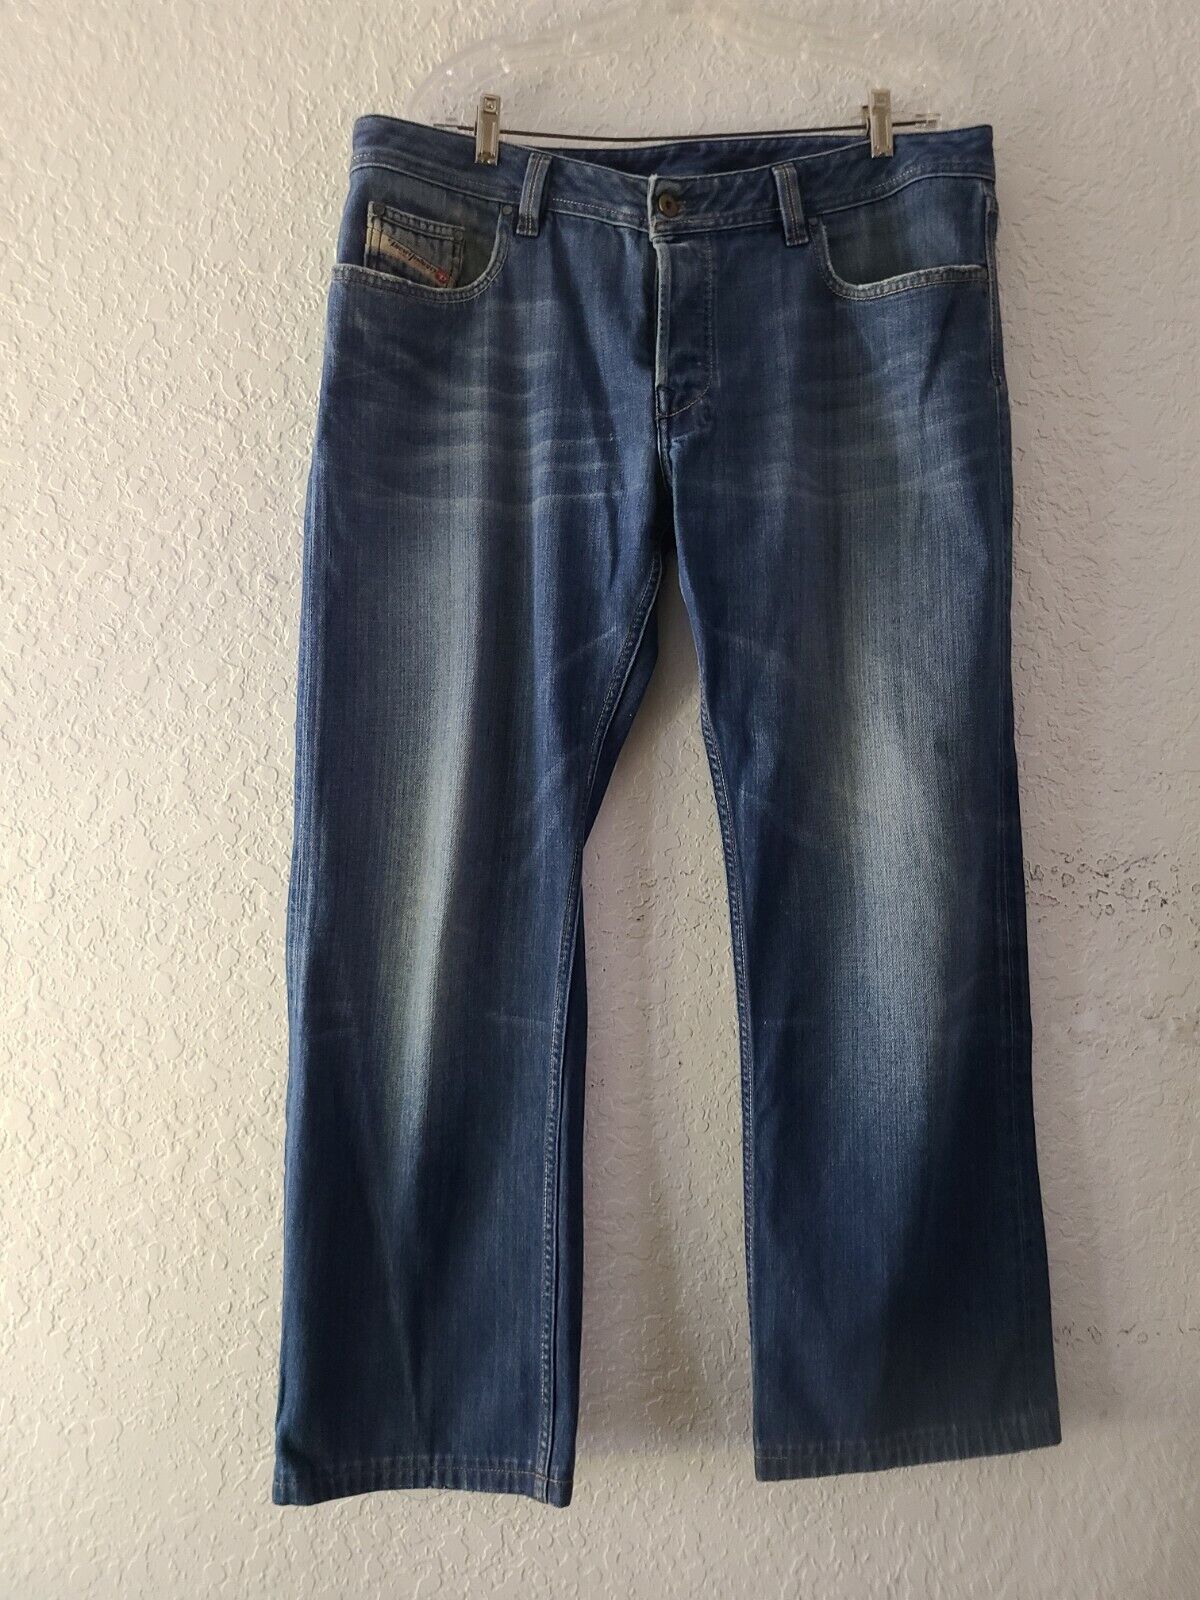 Diesel Levan Straight Jeans Mens Size Blue Medium 38 Wash OFFicial Tulsa Mall mail order